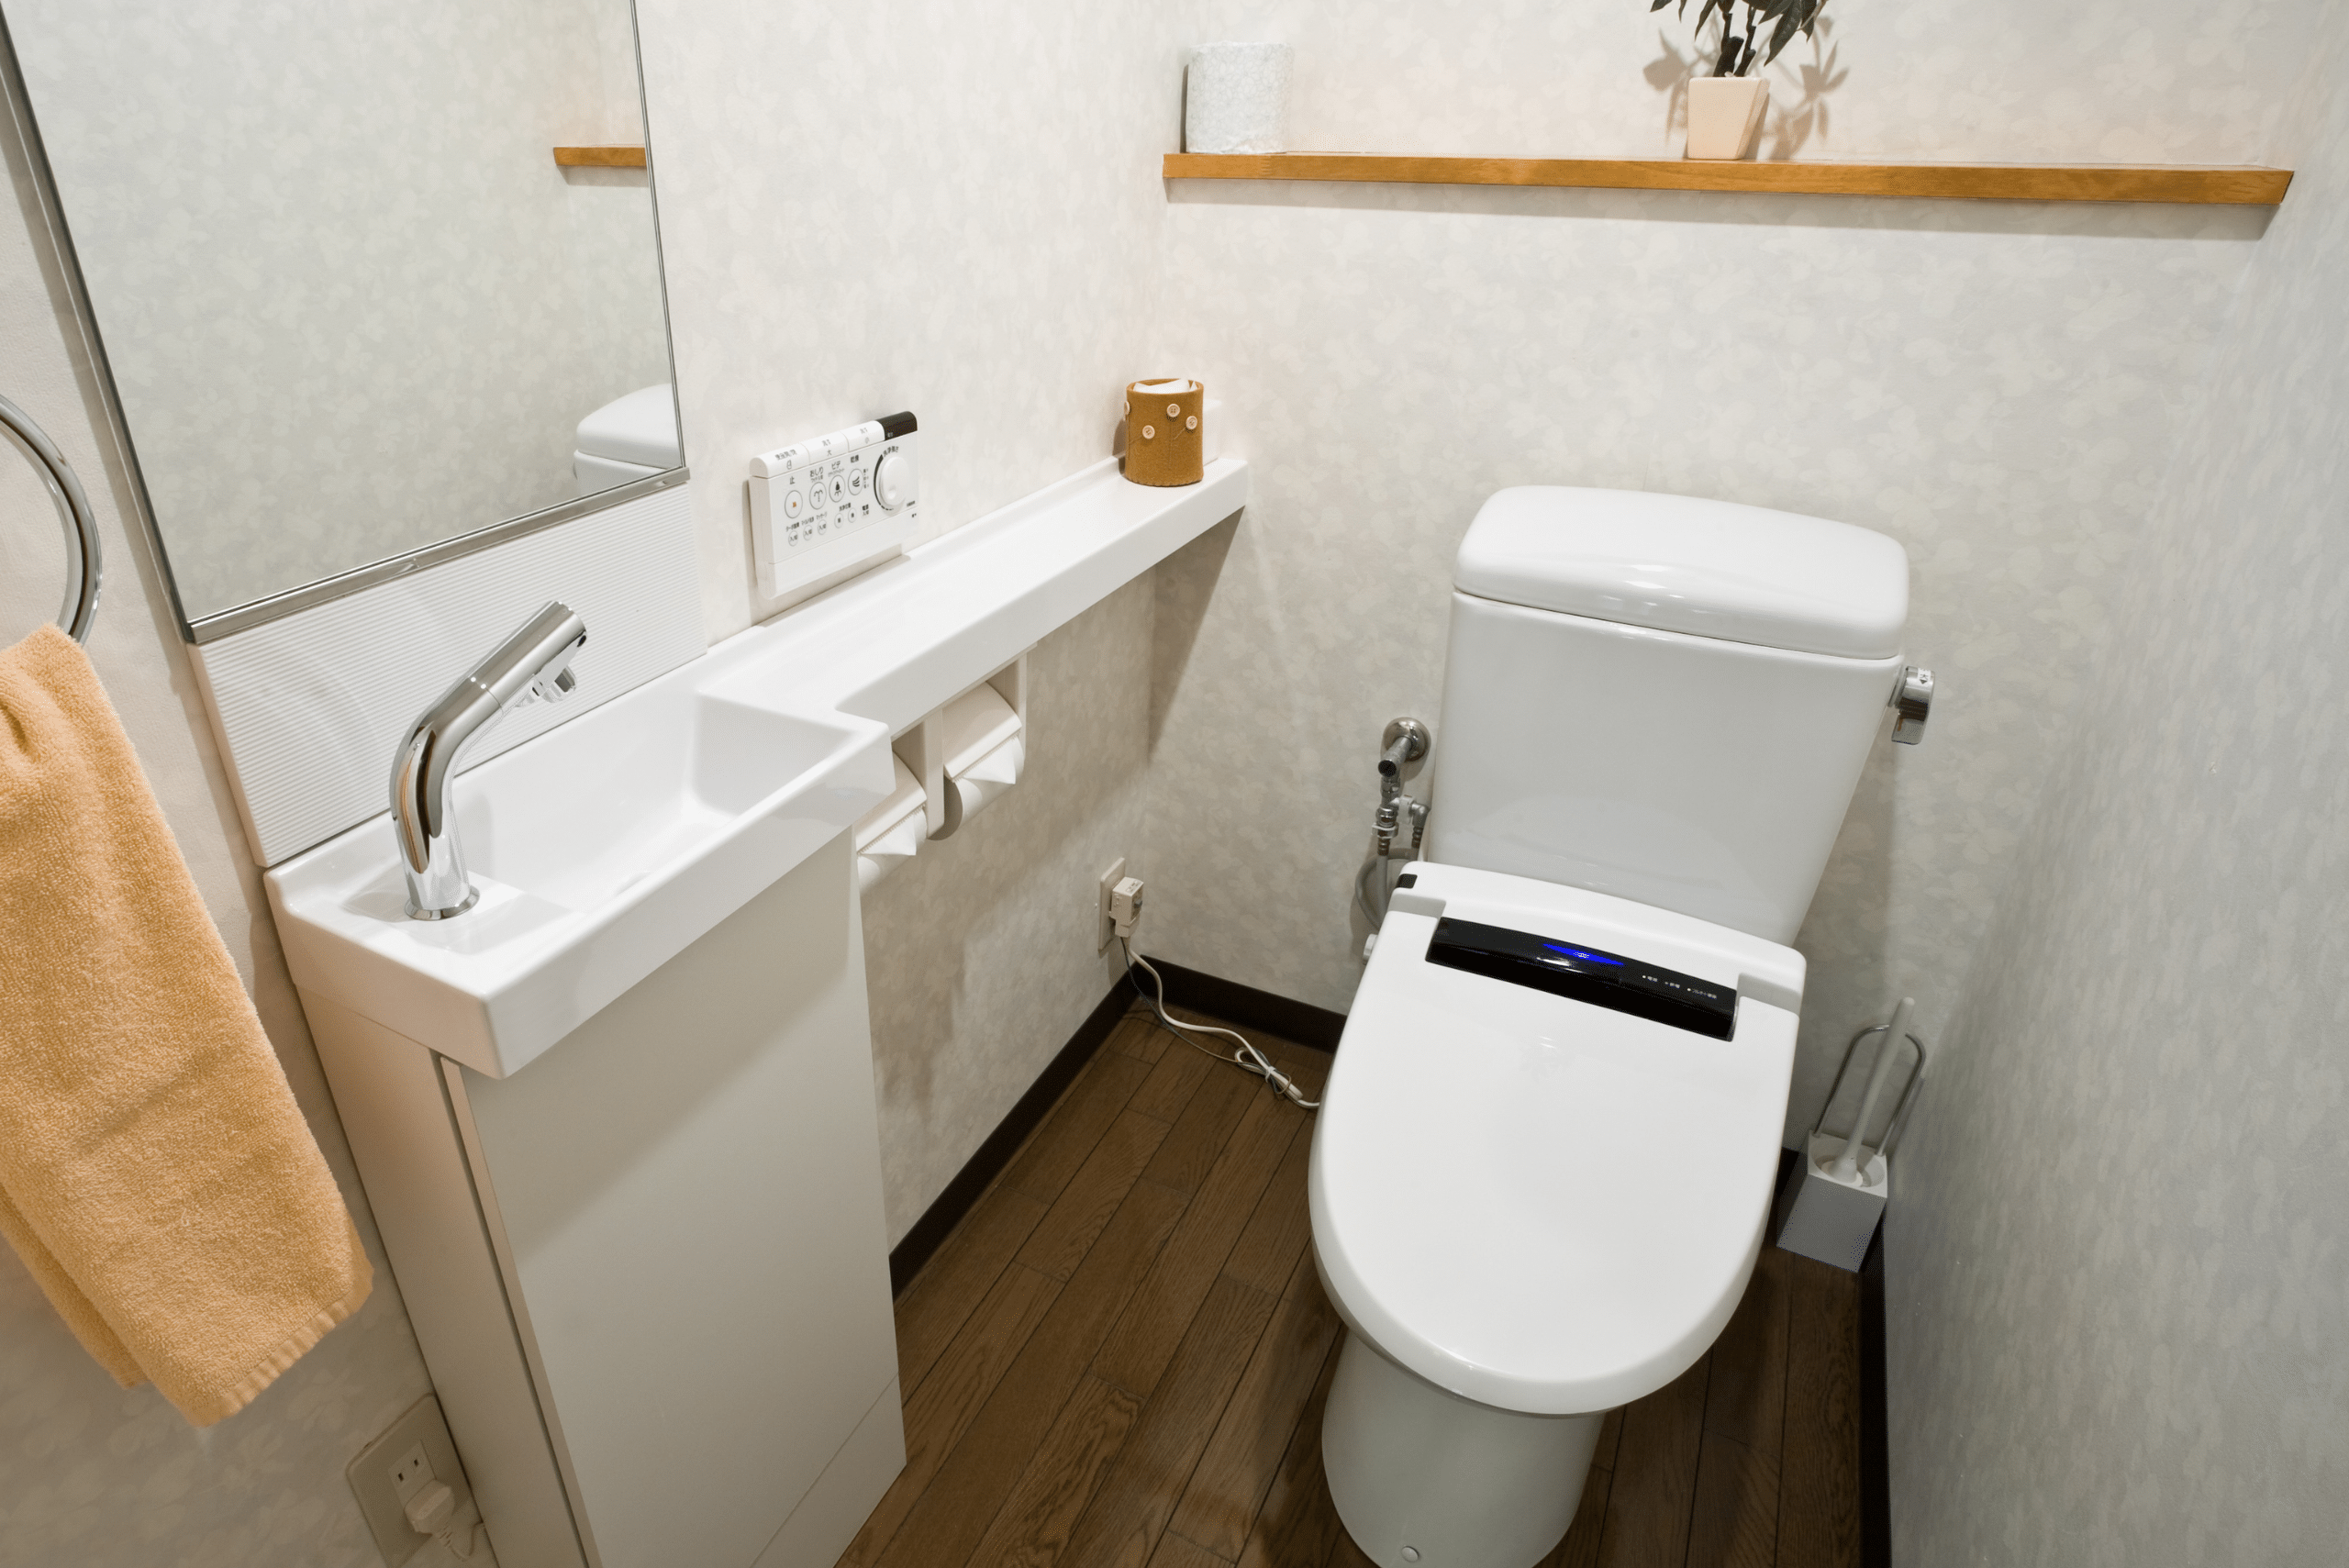 Small bathroom with tiny sink and toliet.